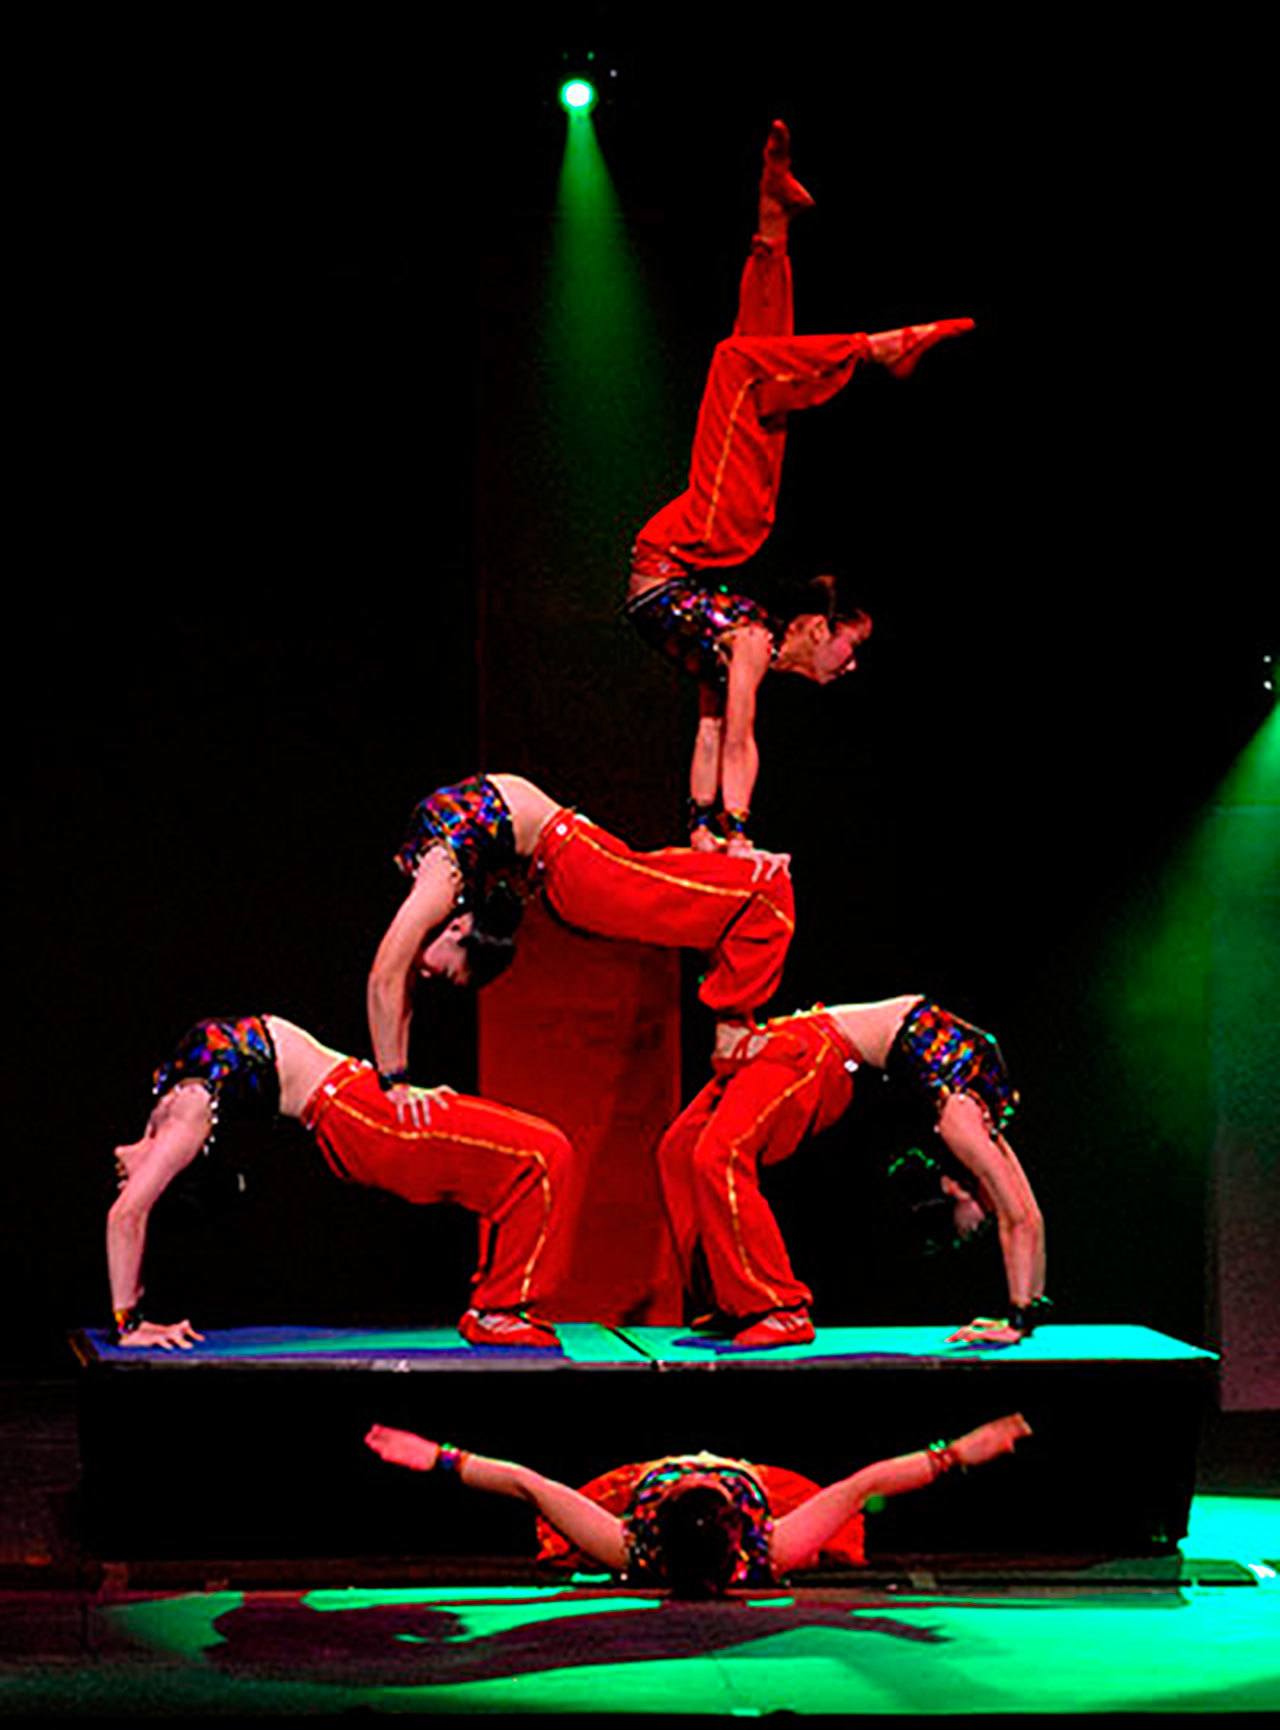 The Peking Acrobats will perform Jan. 25 at the Edmonds Center for the Arts.